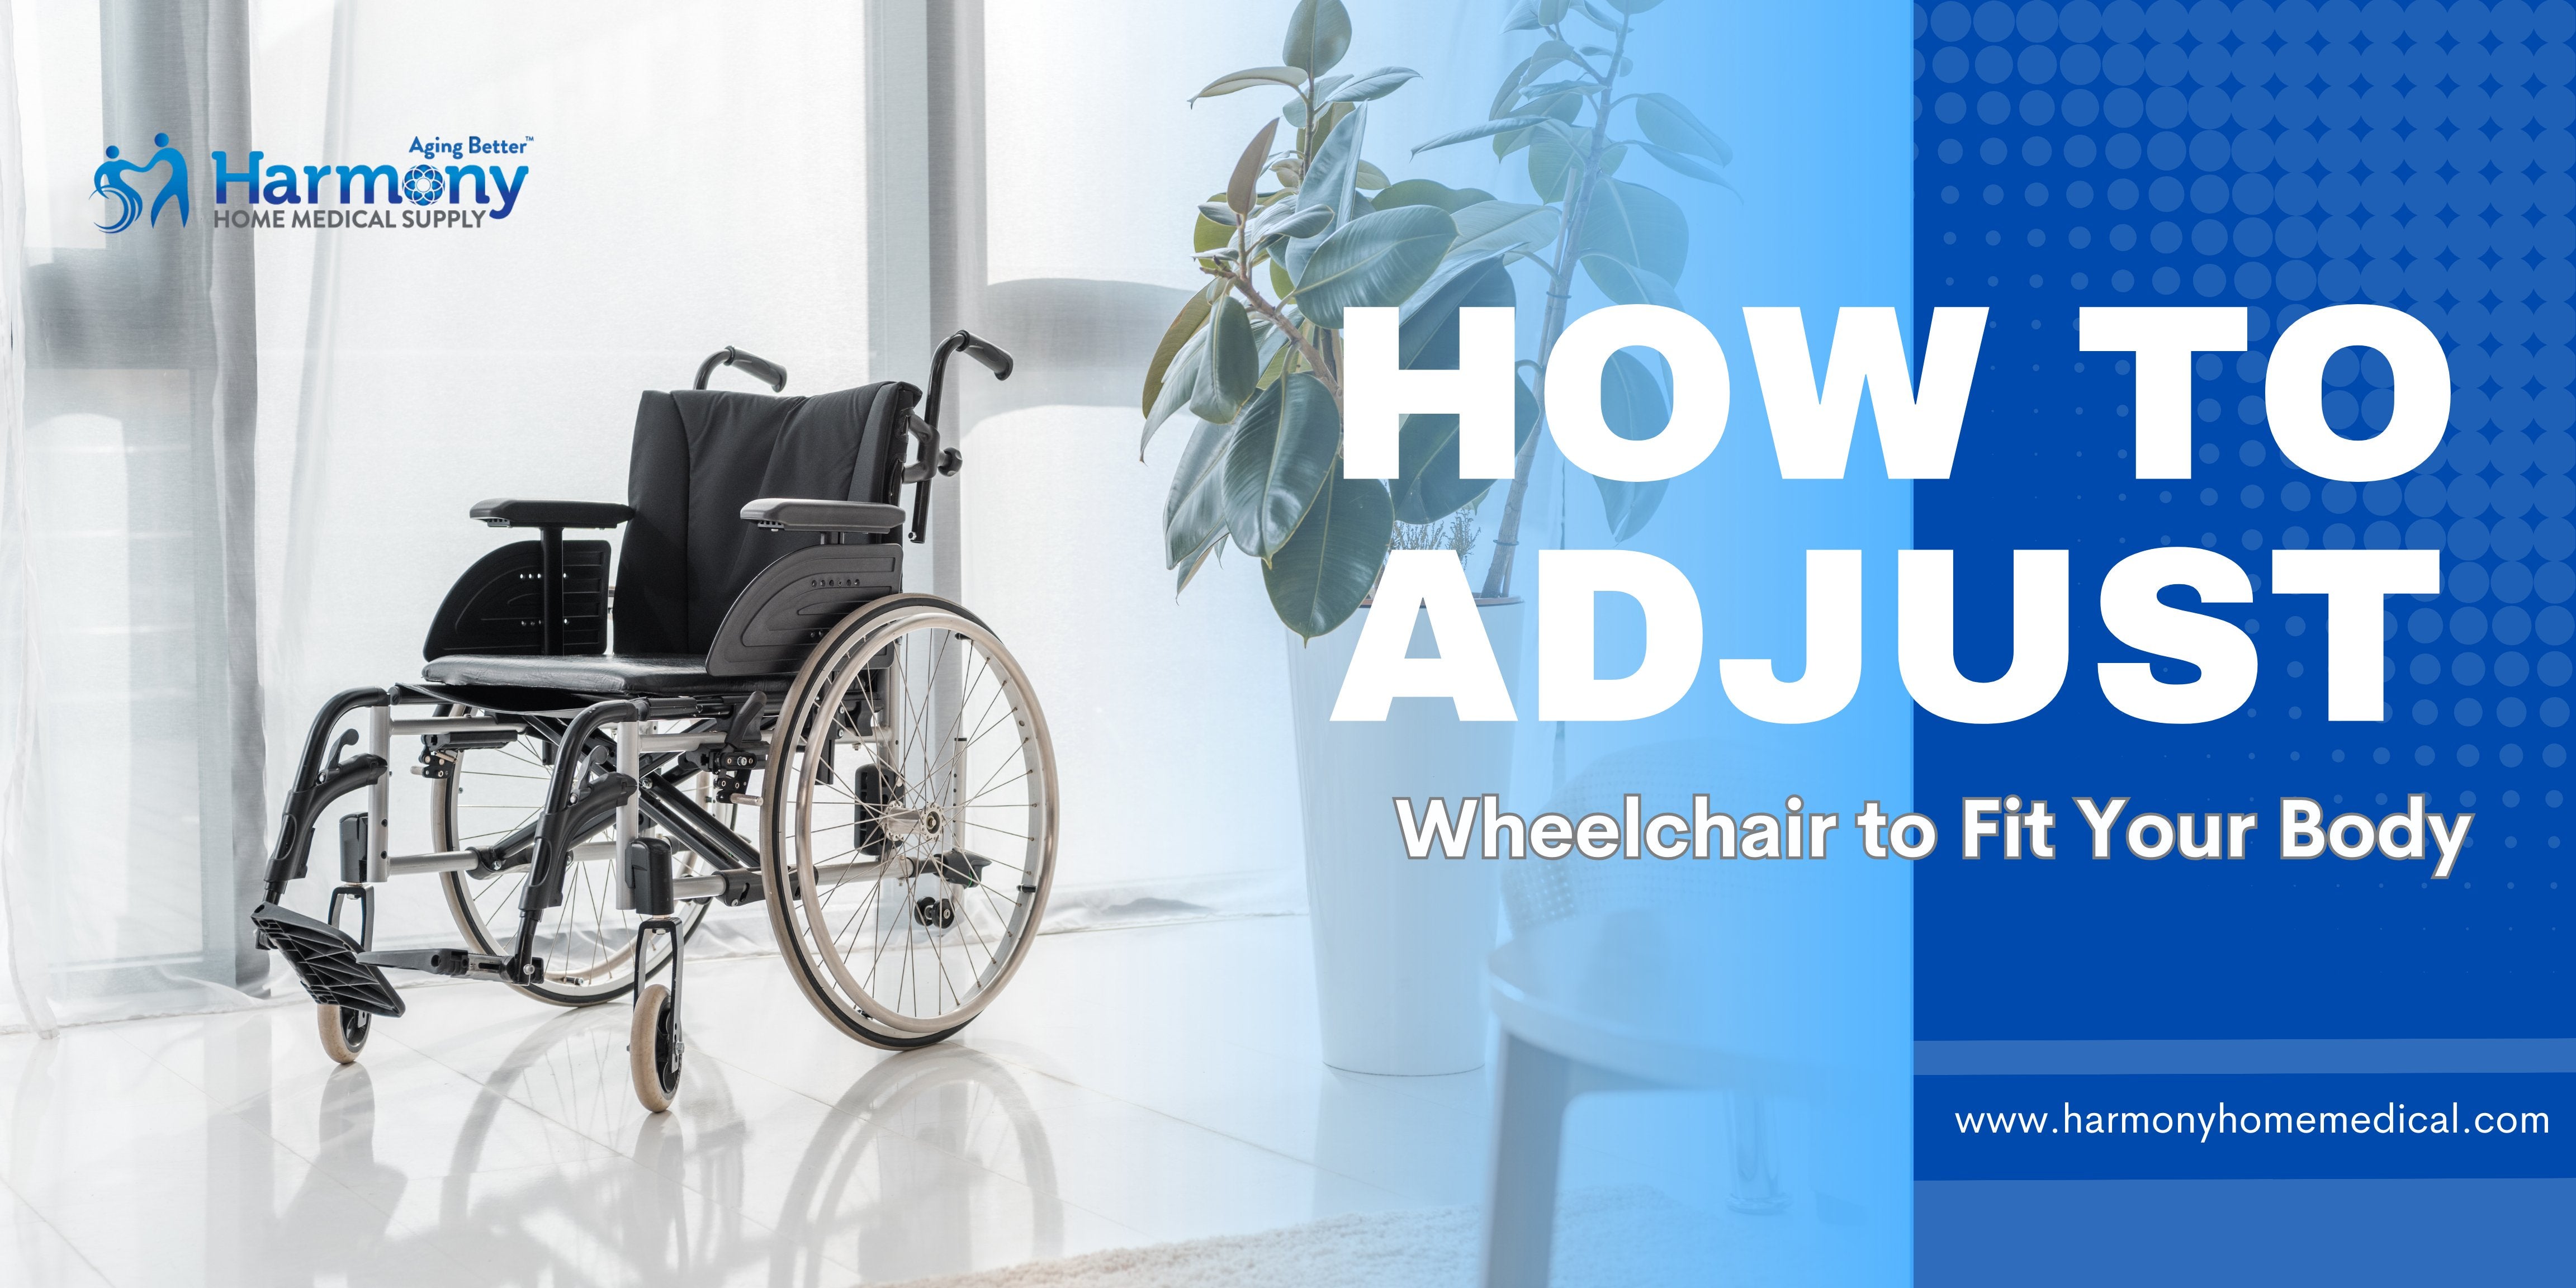 How to Adjust Your Wheelchair to Fit Your Body